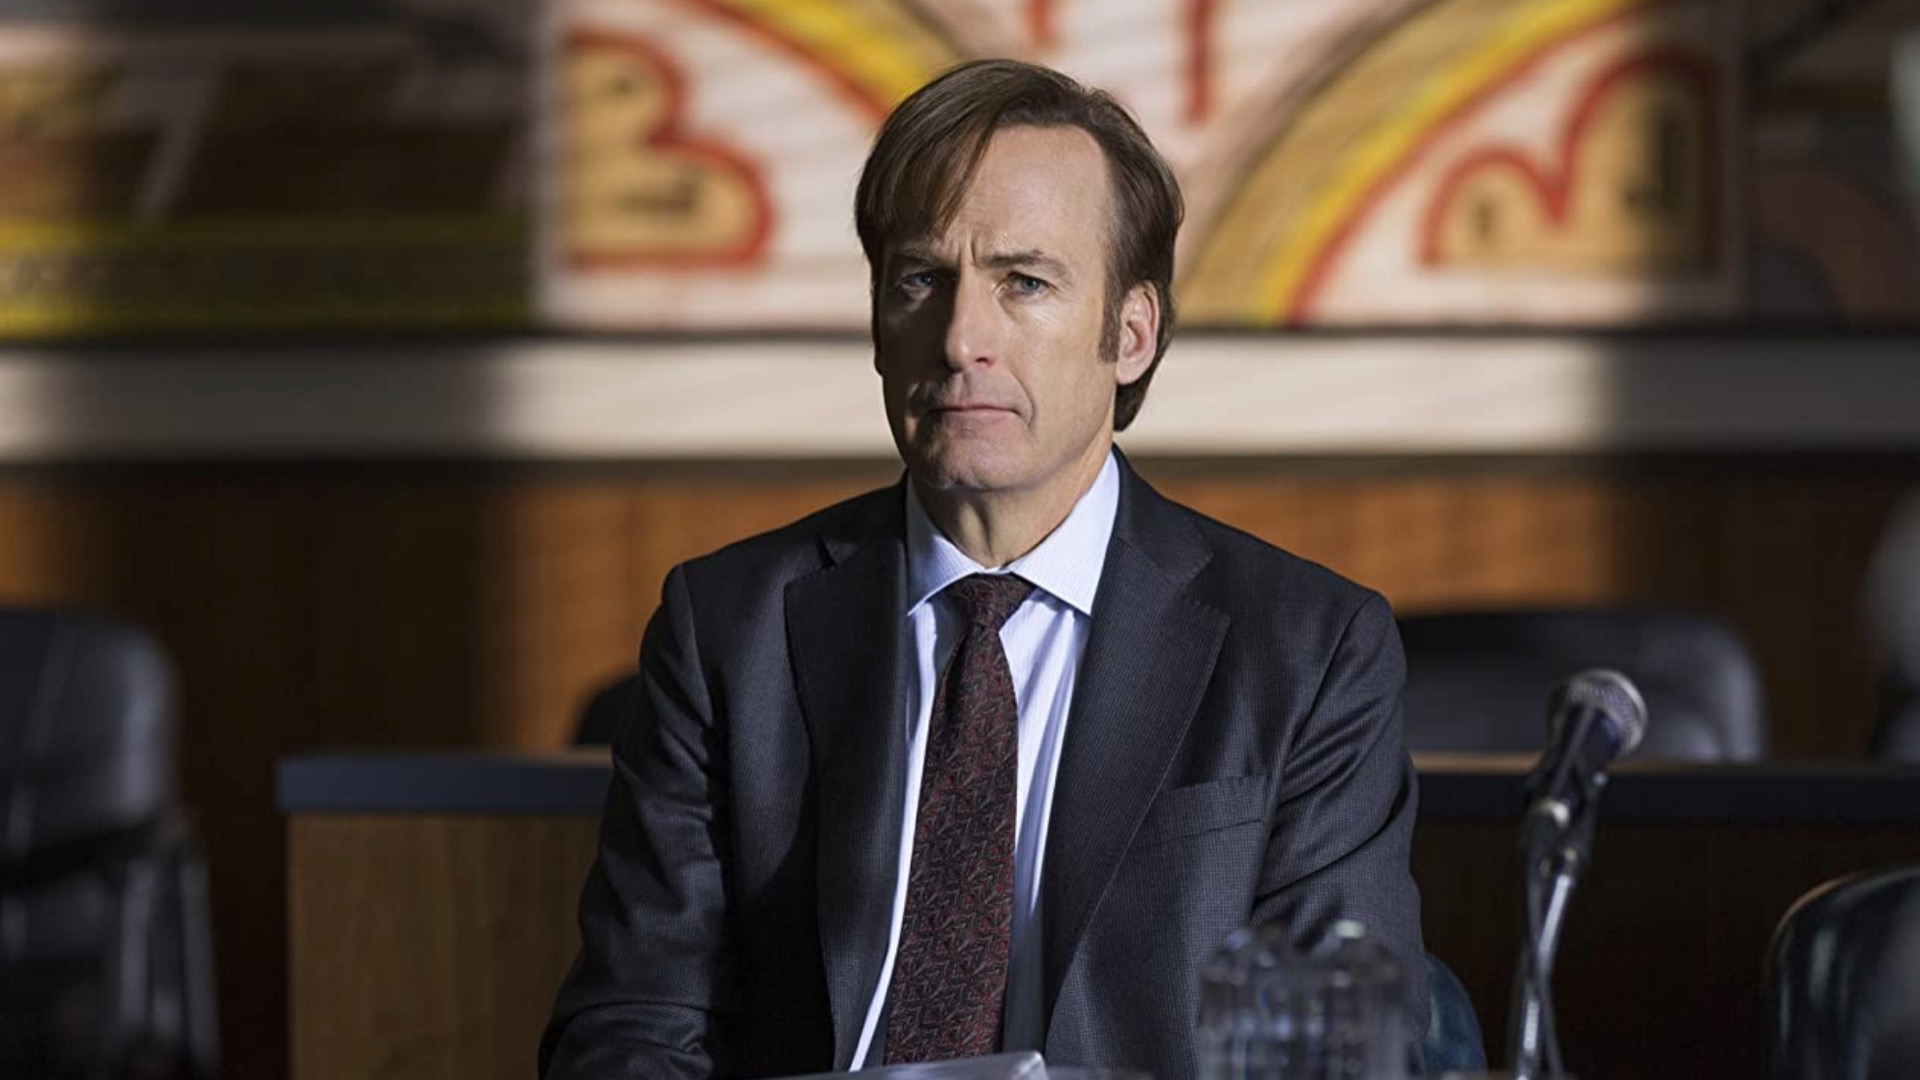 Bob Odenkirk set to lead new comedy drama series from AMC